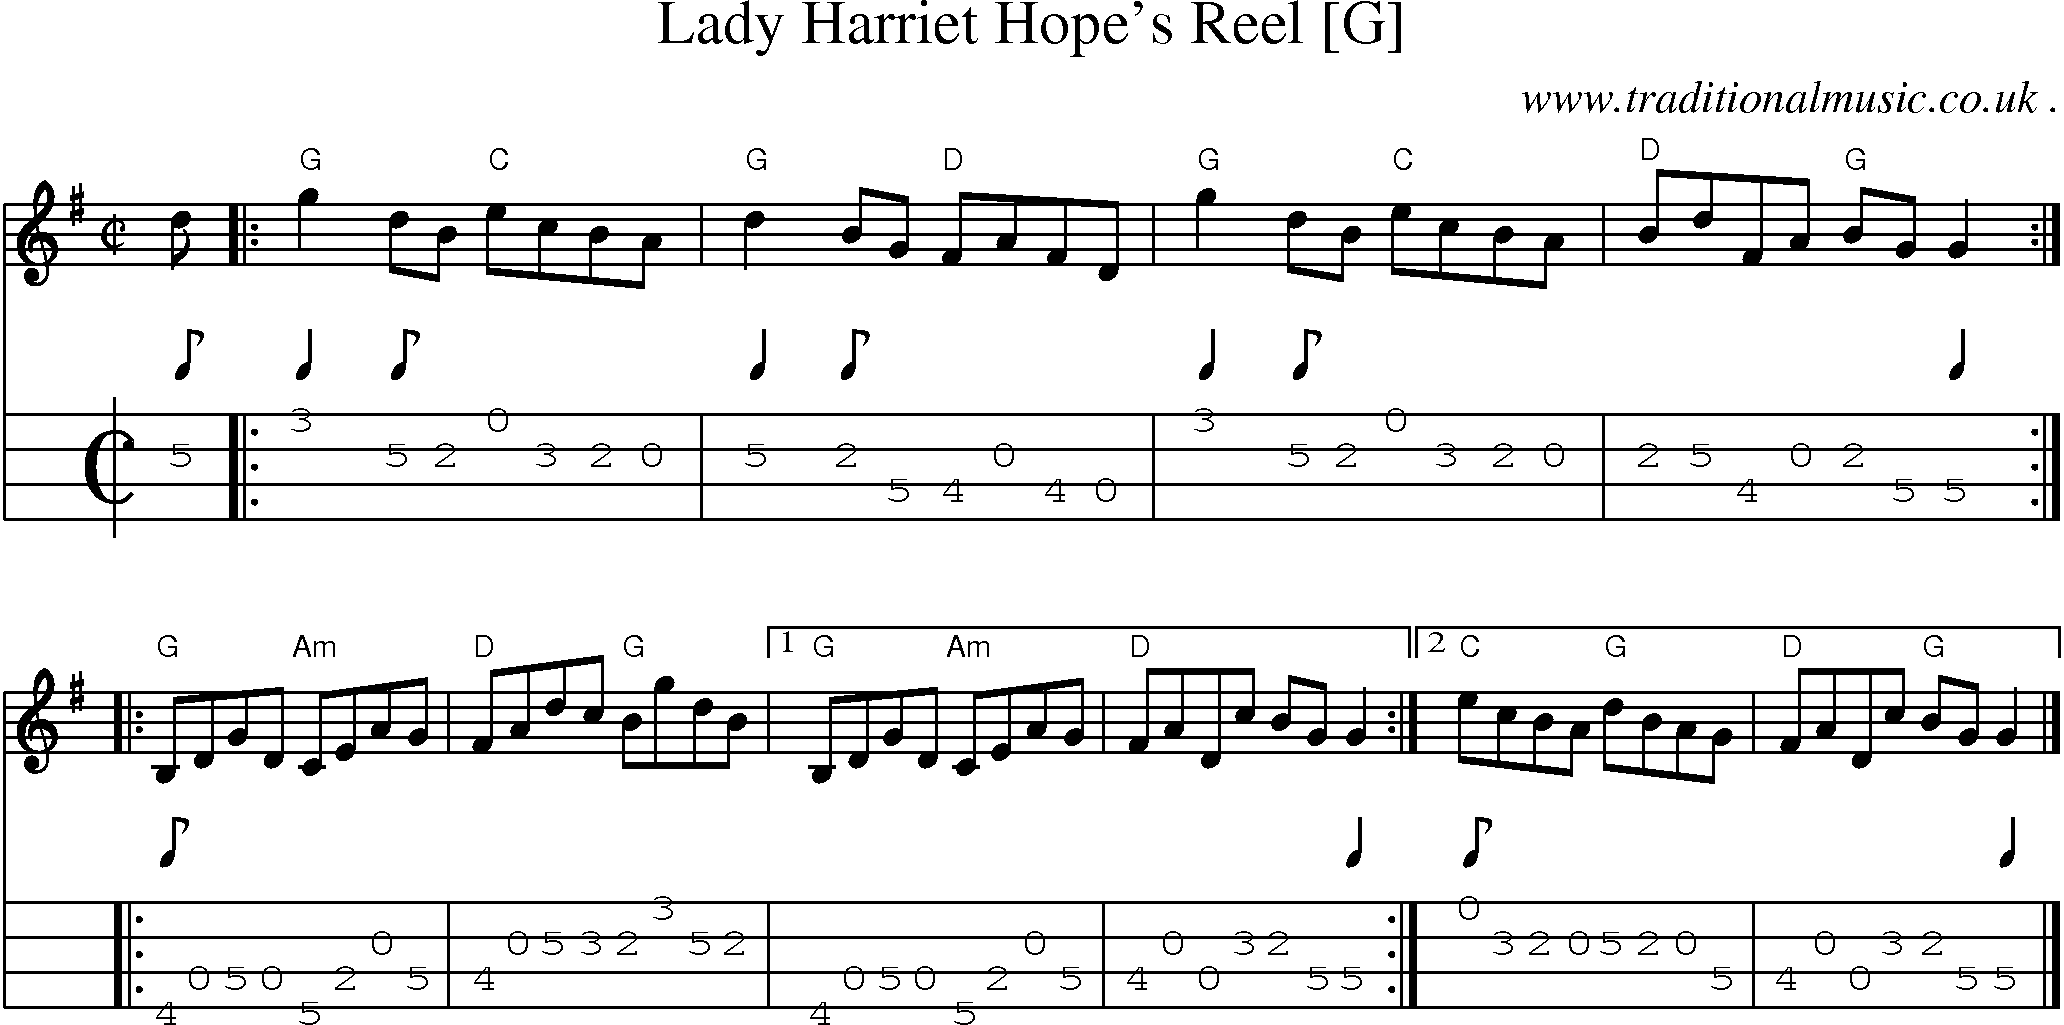 Sheet-music  score, Chords and Mandolin Tabs for Lady Harriet Hopes Reel [g]